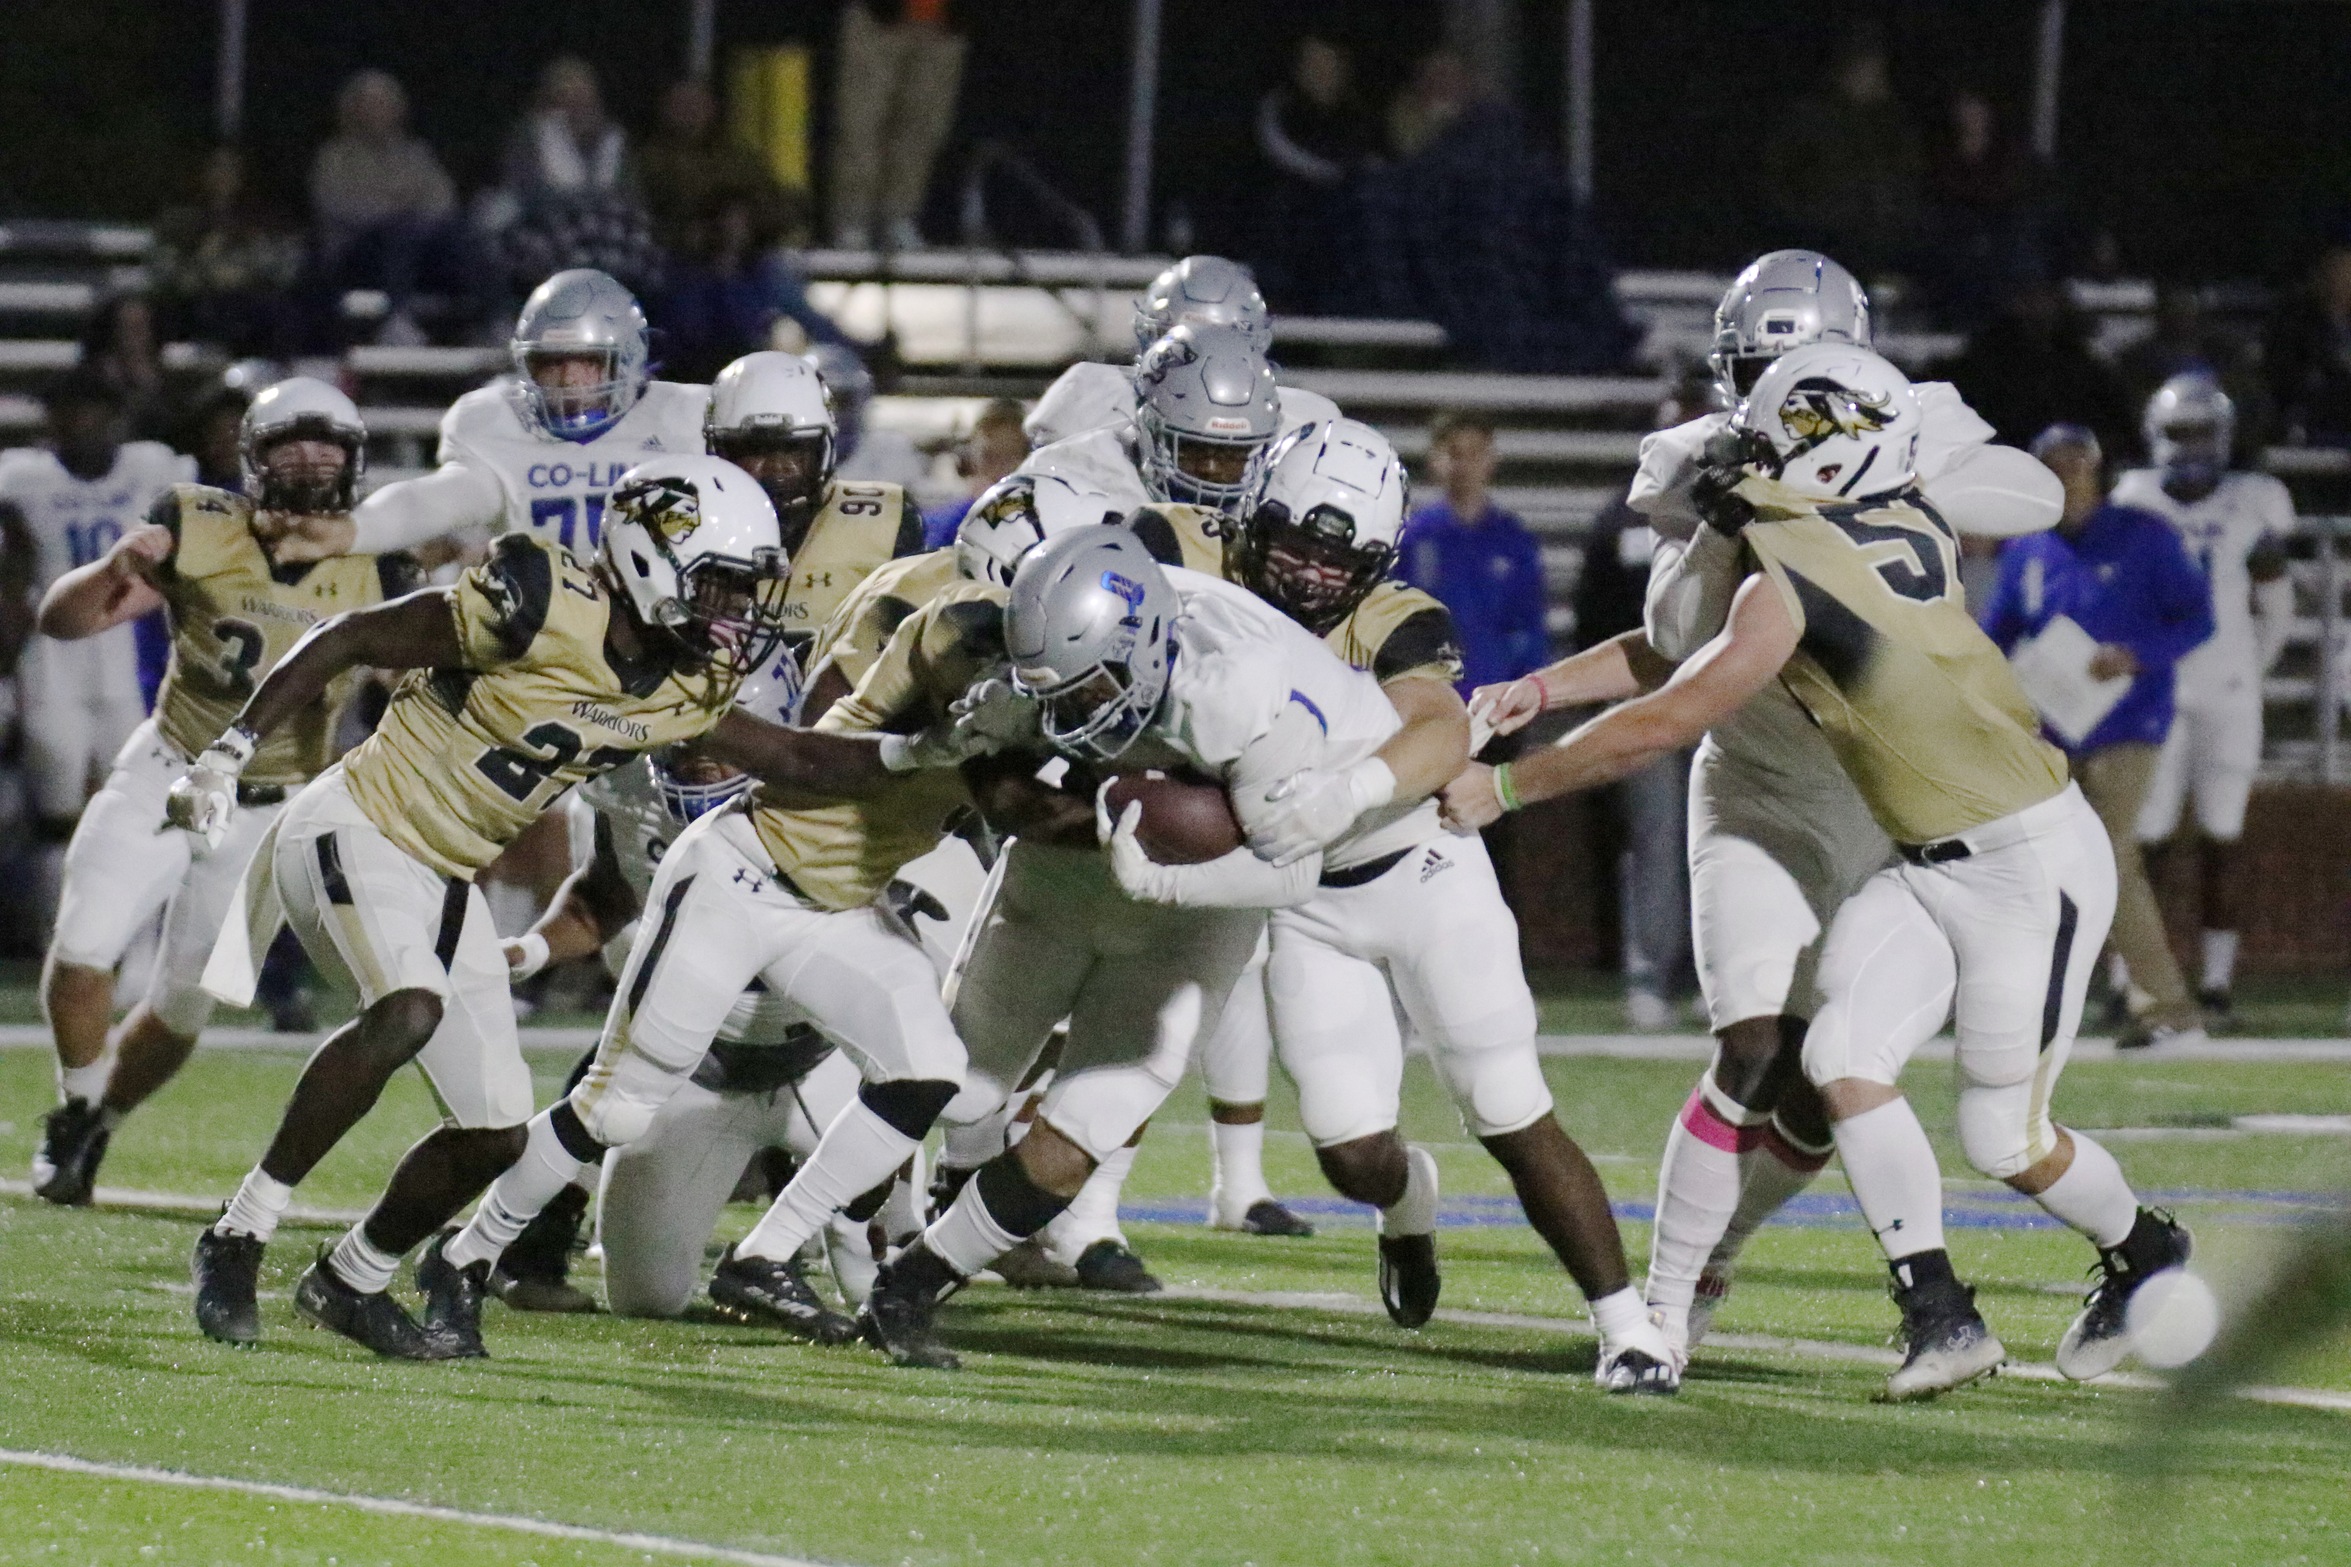 Co-Lin Defeats the Warriors in Decatur, 26-14